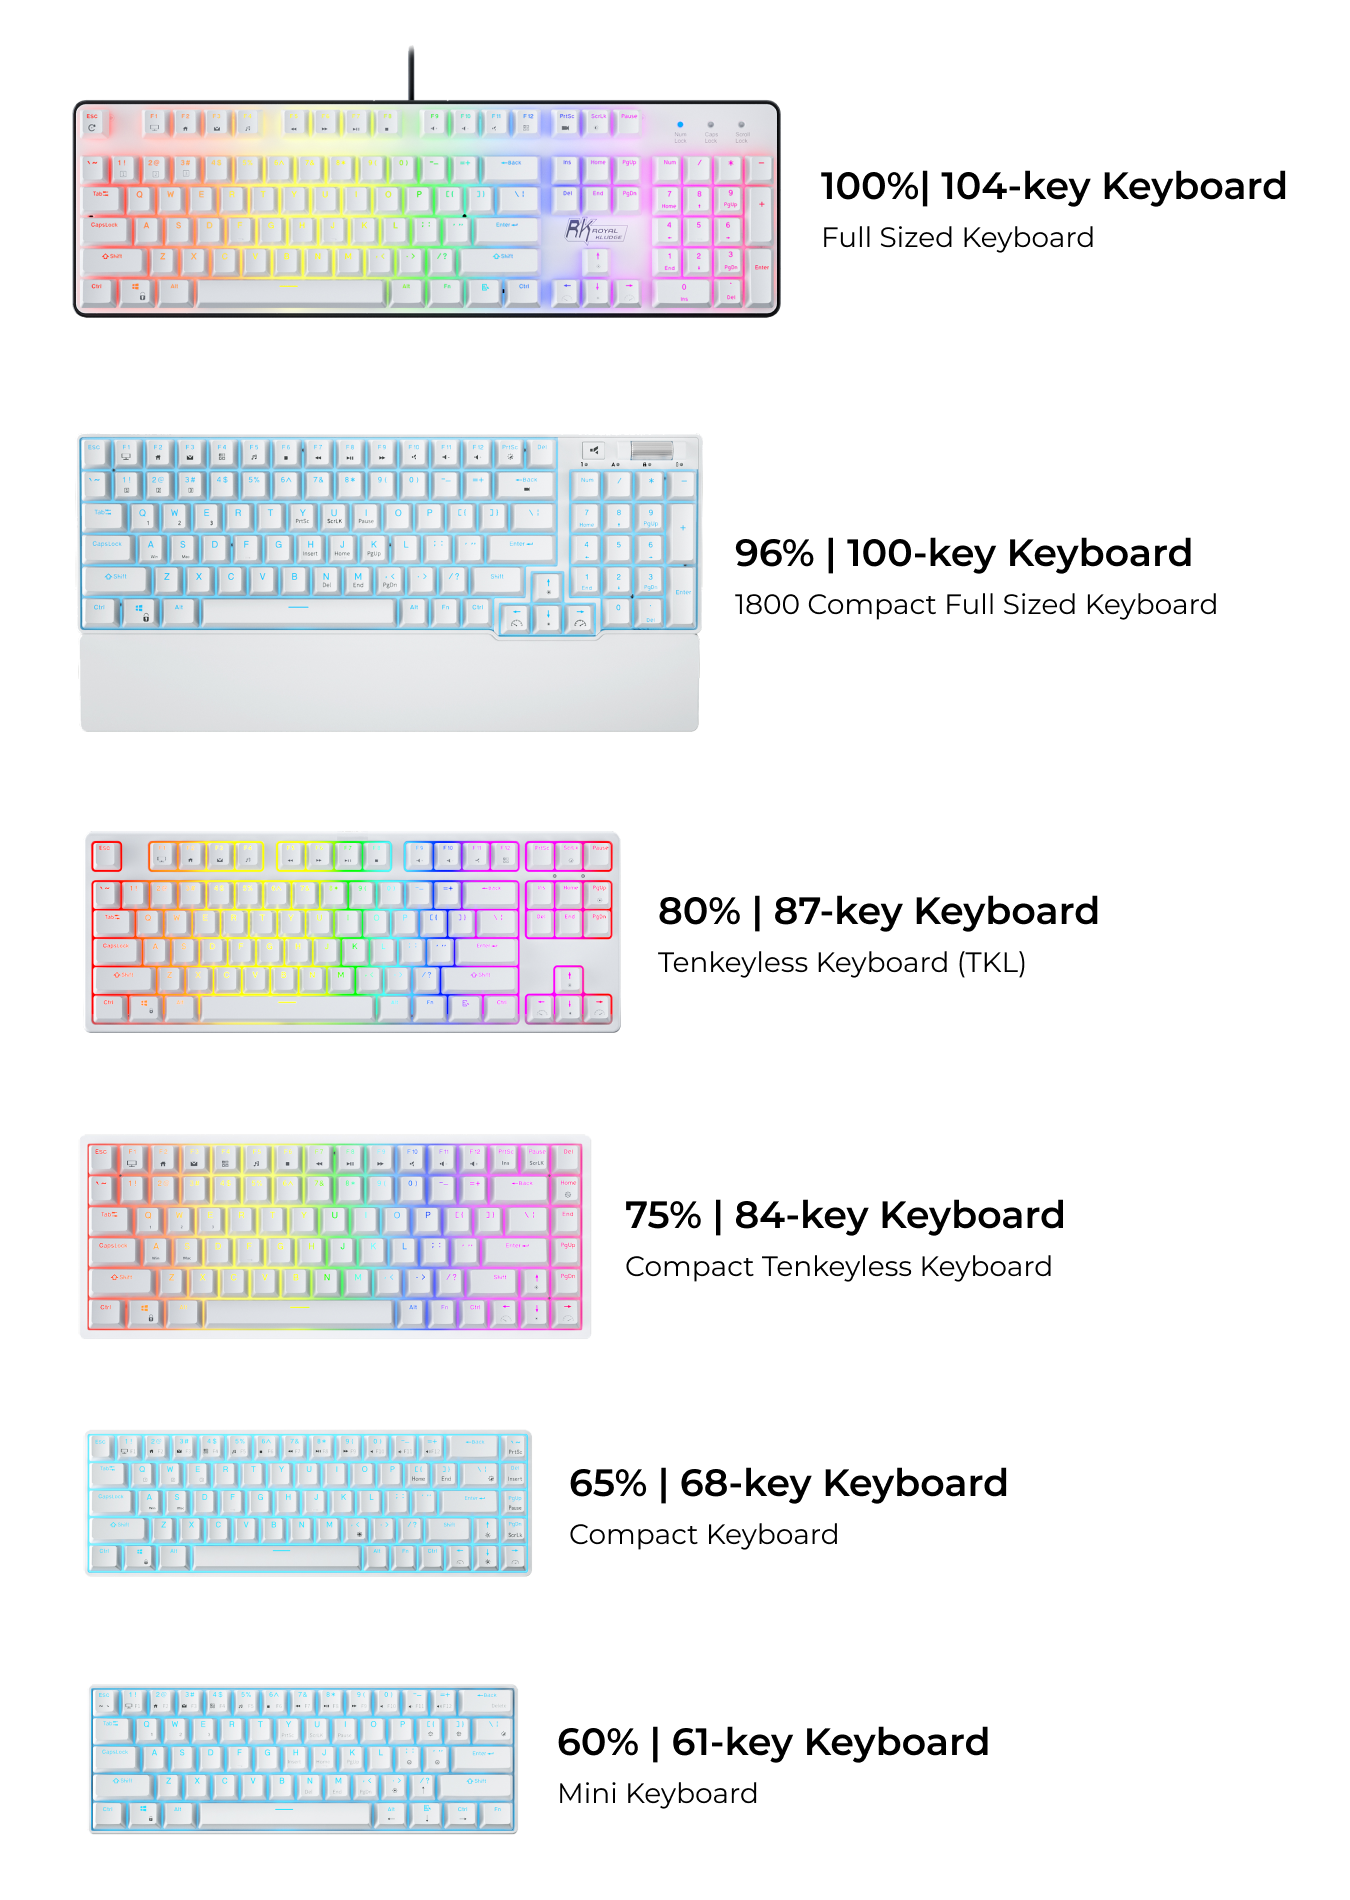 Keyboard Size & Layout Buying Guide